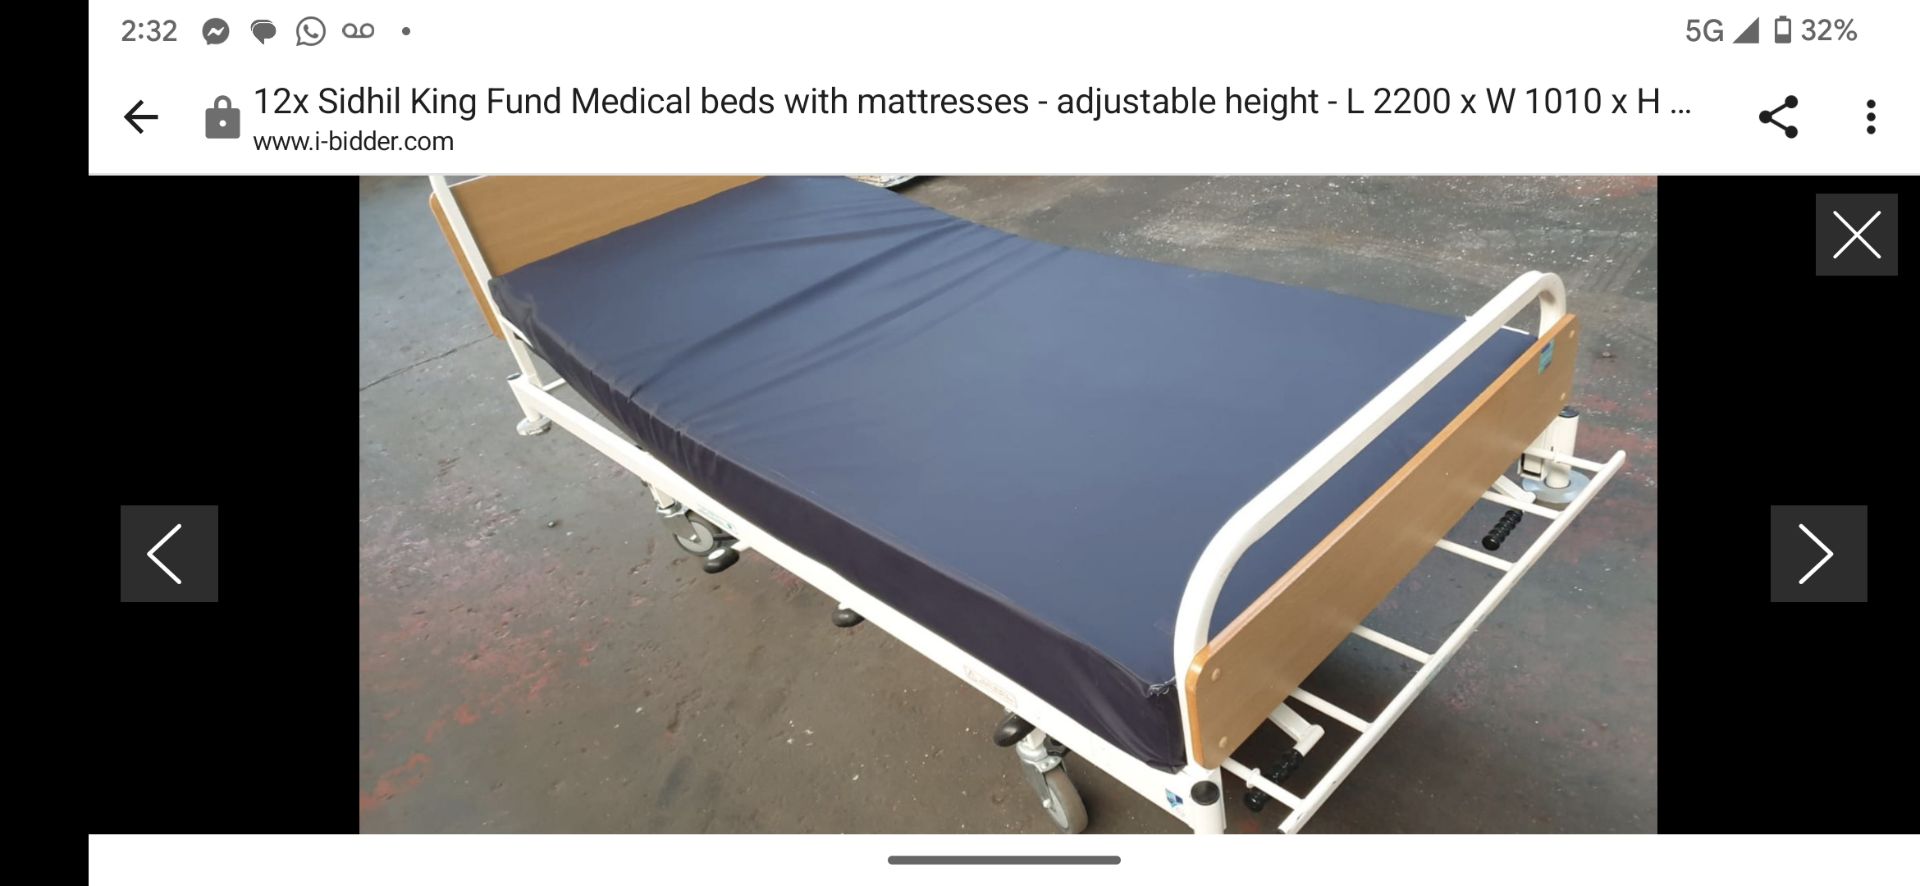 1 x Sidhil Kings Kund Hydraulic Hospital Bed With Mattress - Image 3 of 6